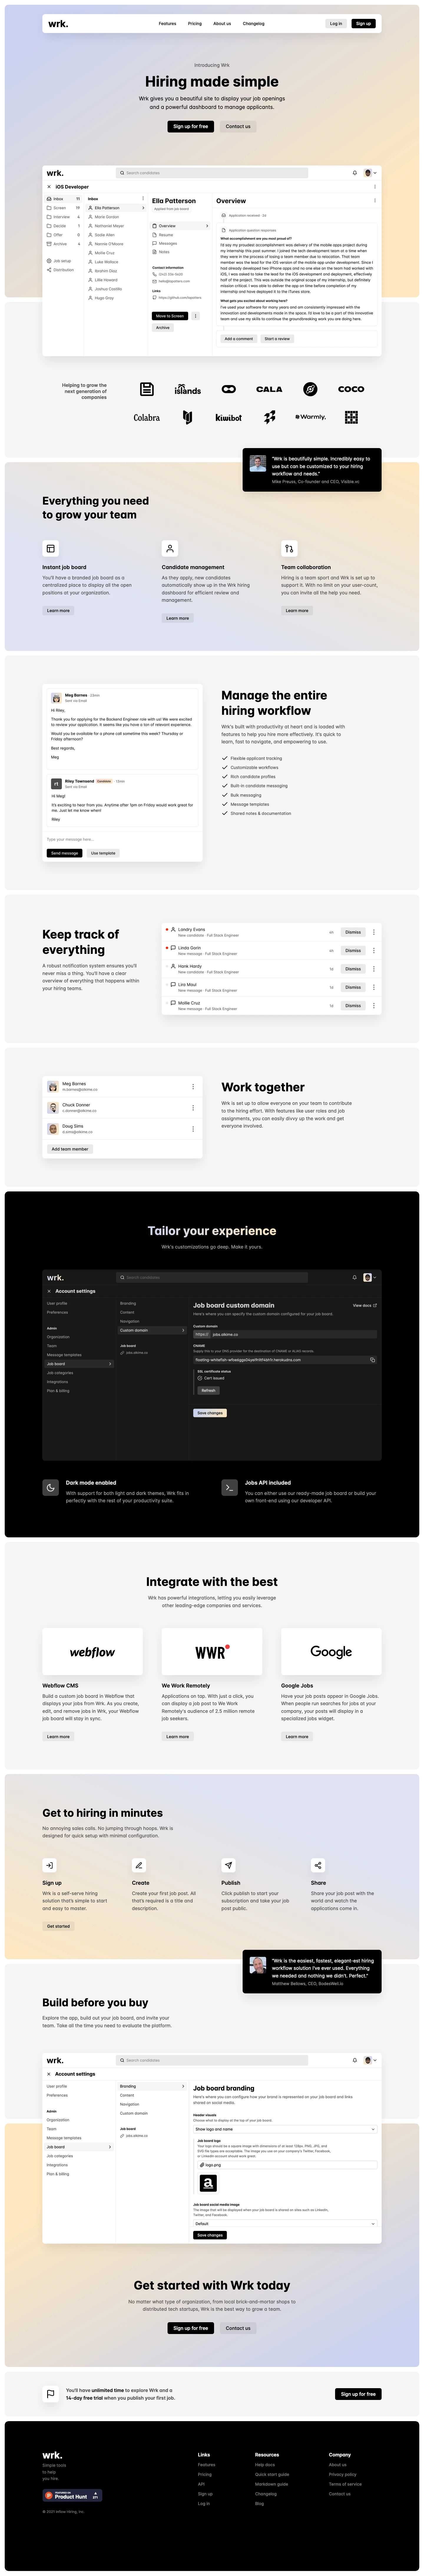 Wrk Landing Page Example: Hiring made simple. Wrk gives you a beautiful site to display your job openings and a powerful dashboard to manage applicants.